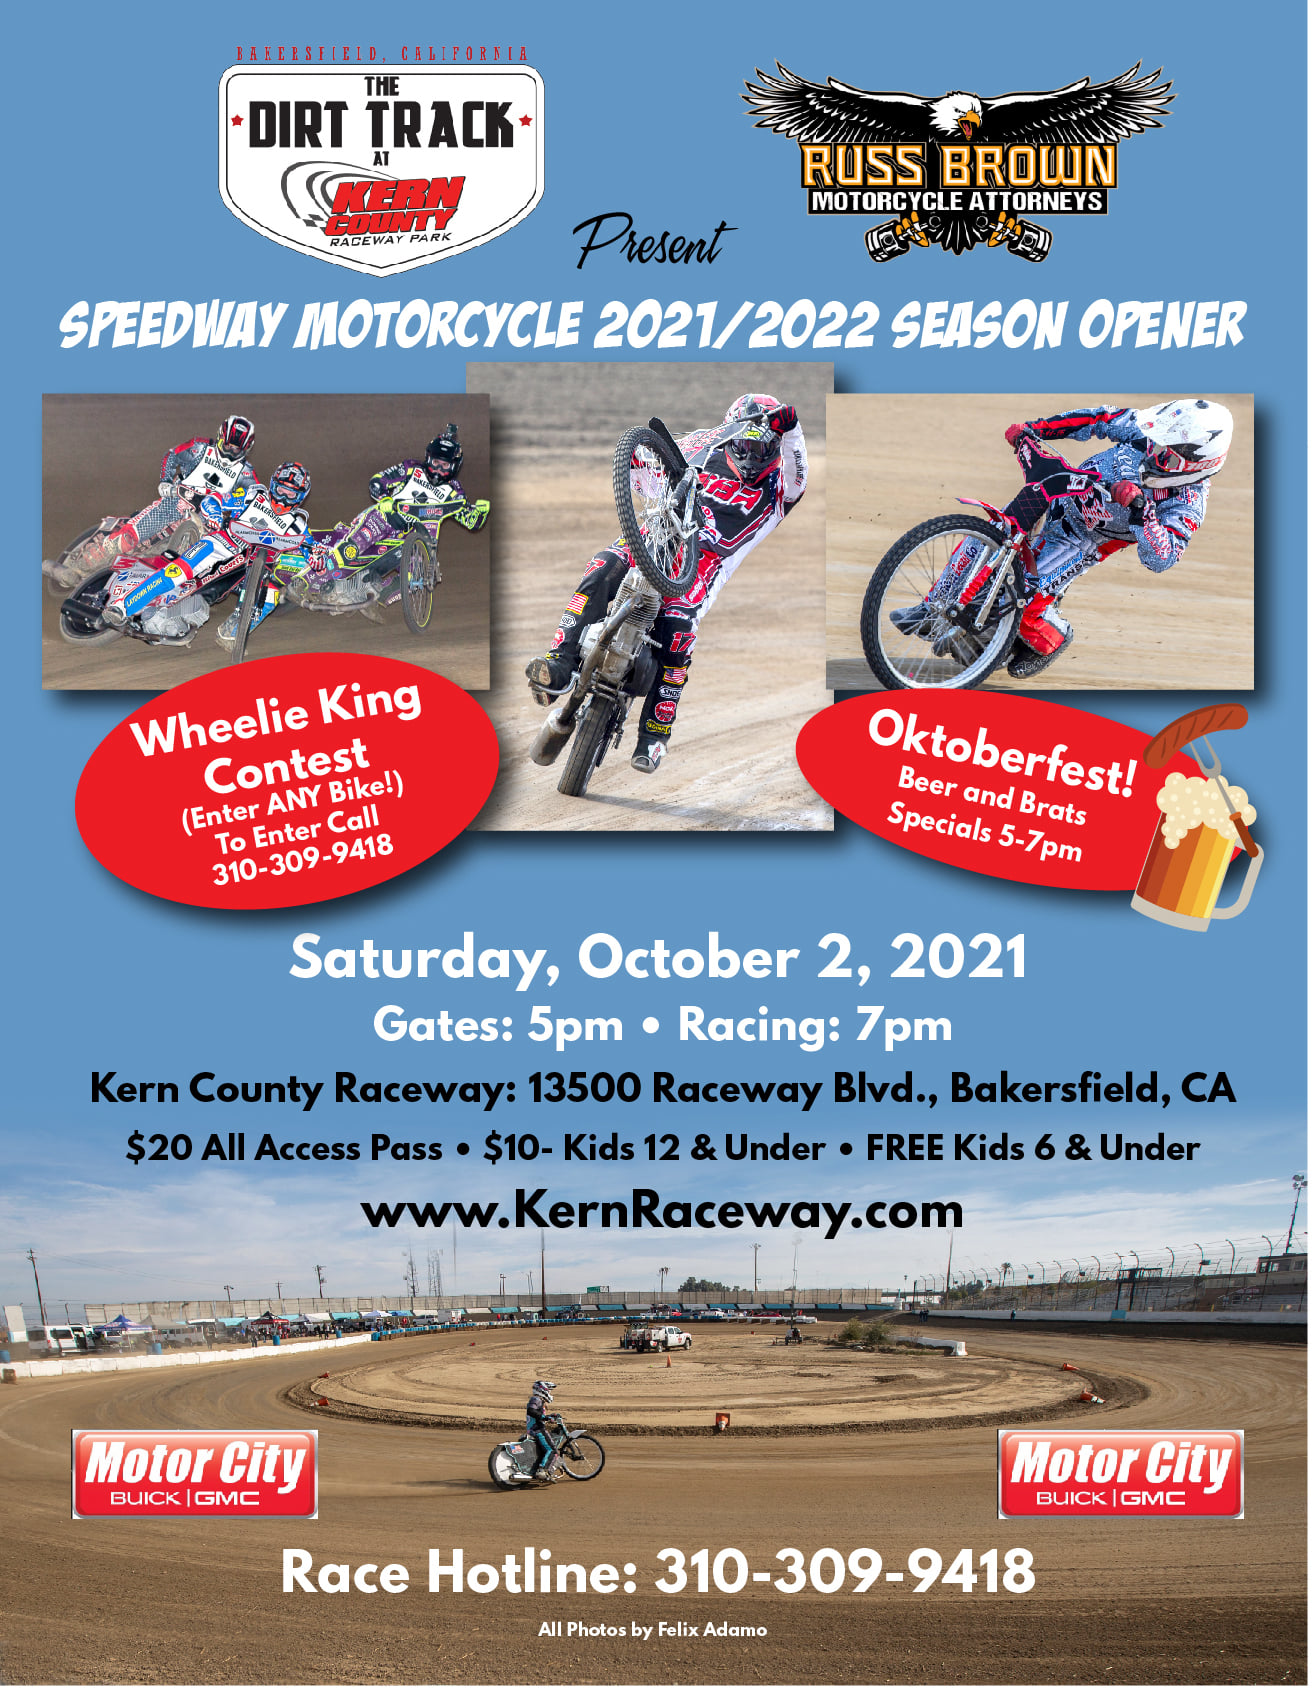 Professional Speedway Motorcycle Races